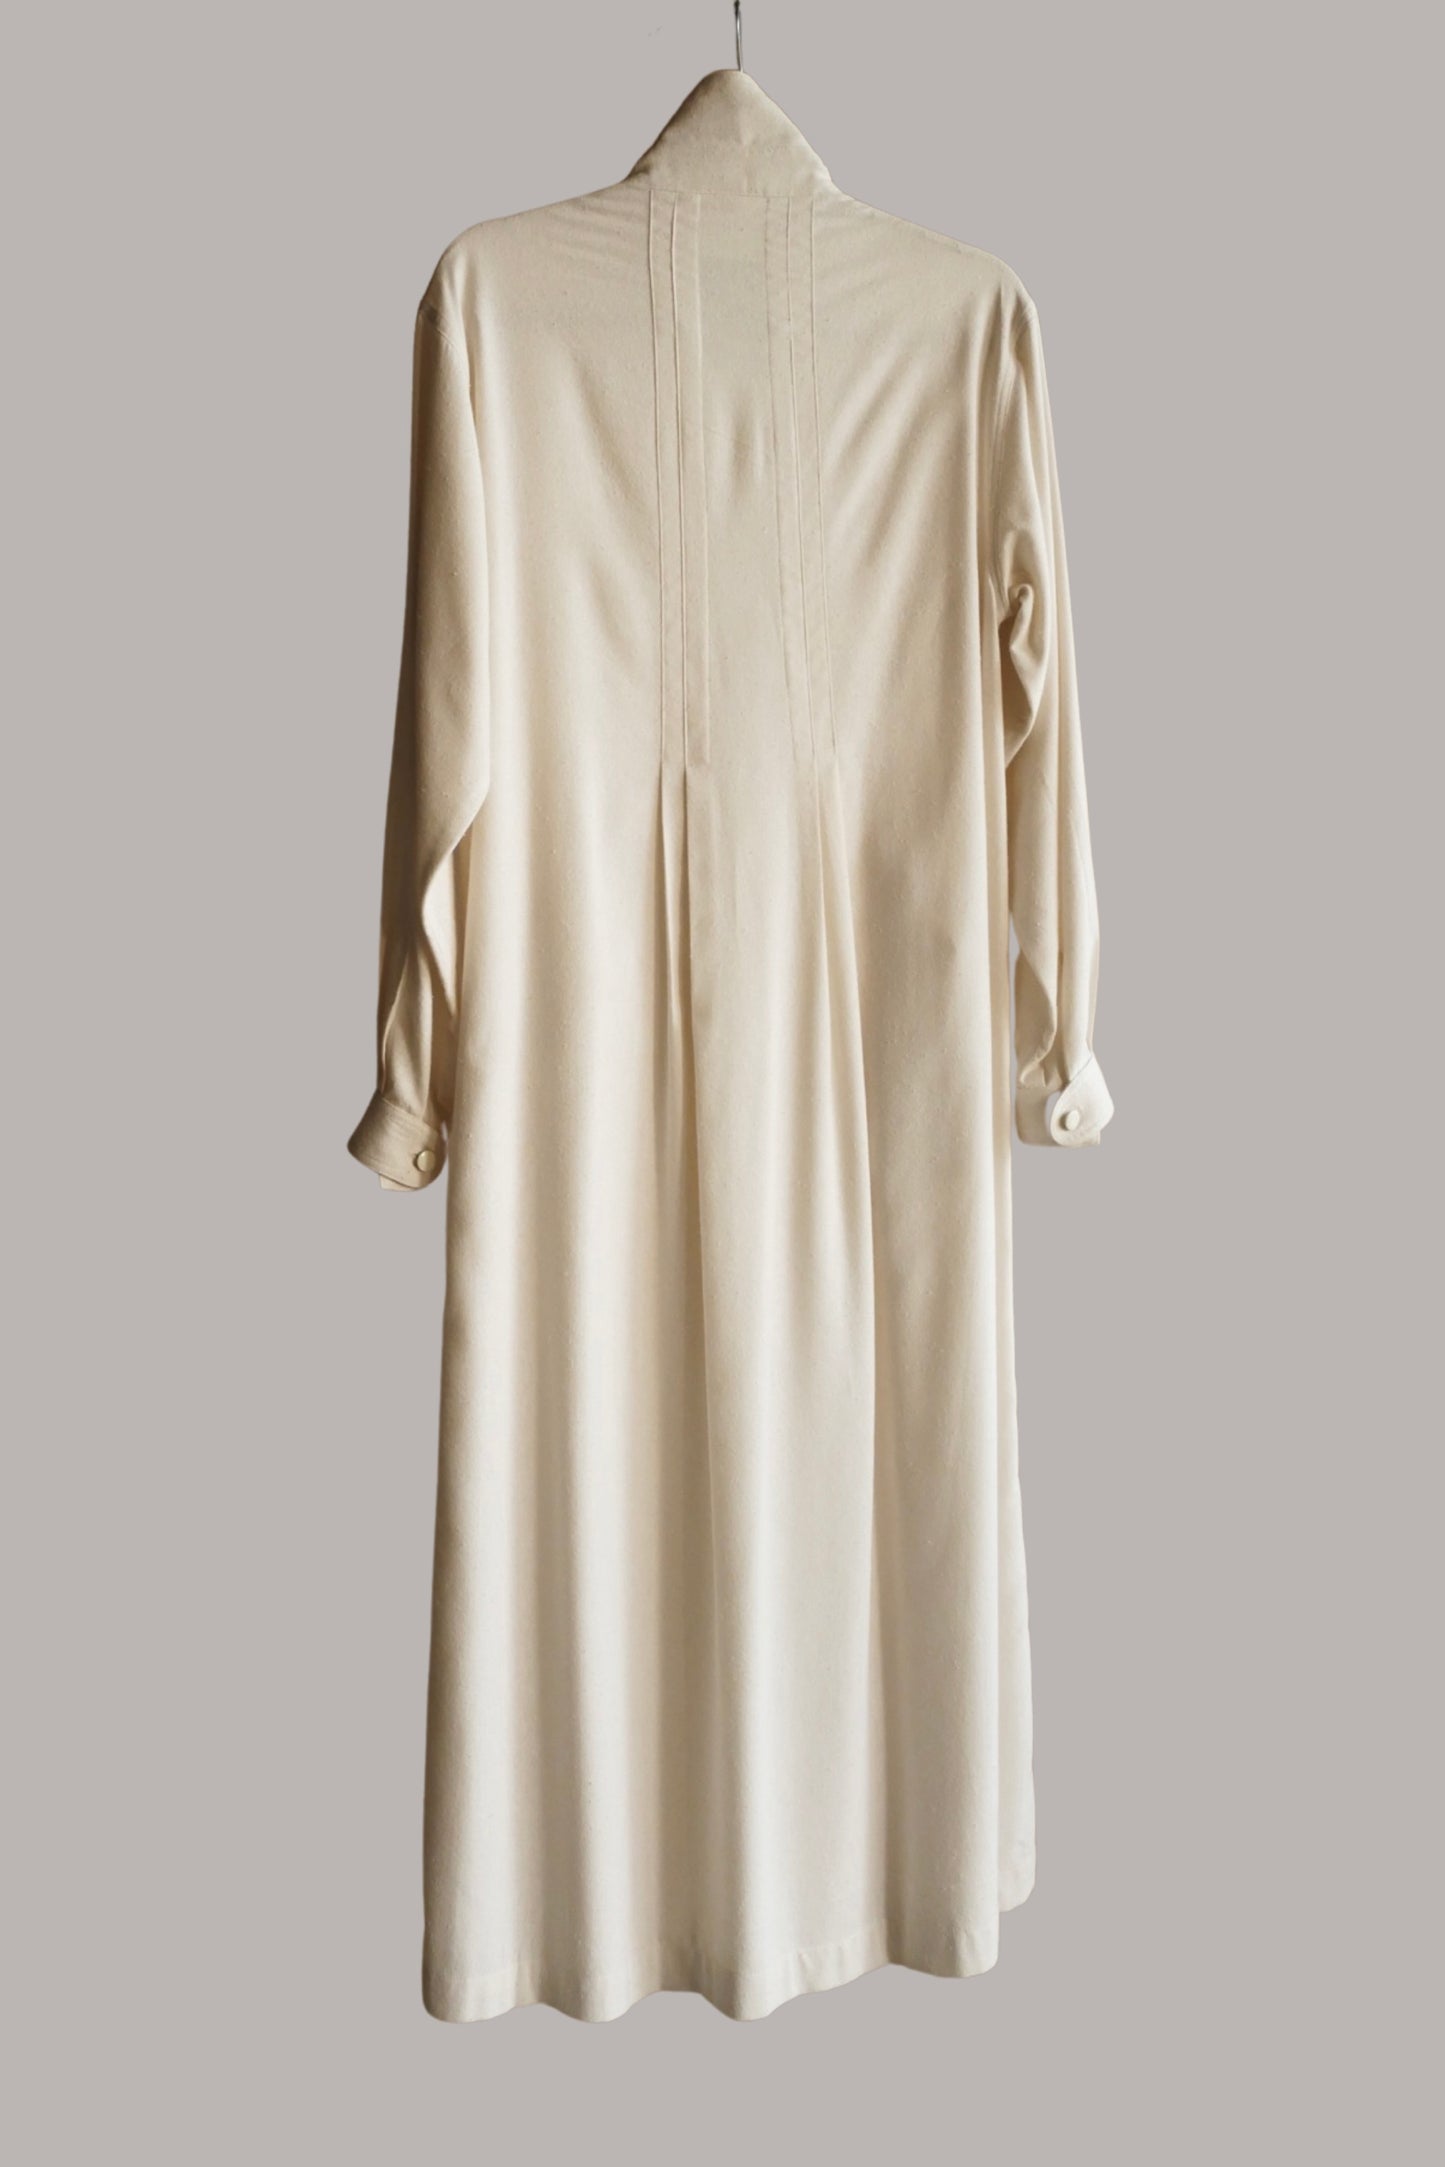 Riding Dress in Ivory Cream Raw Silk {Made to Order}